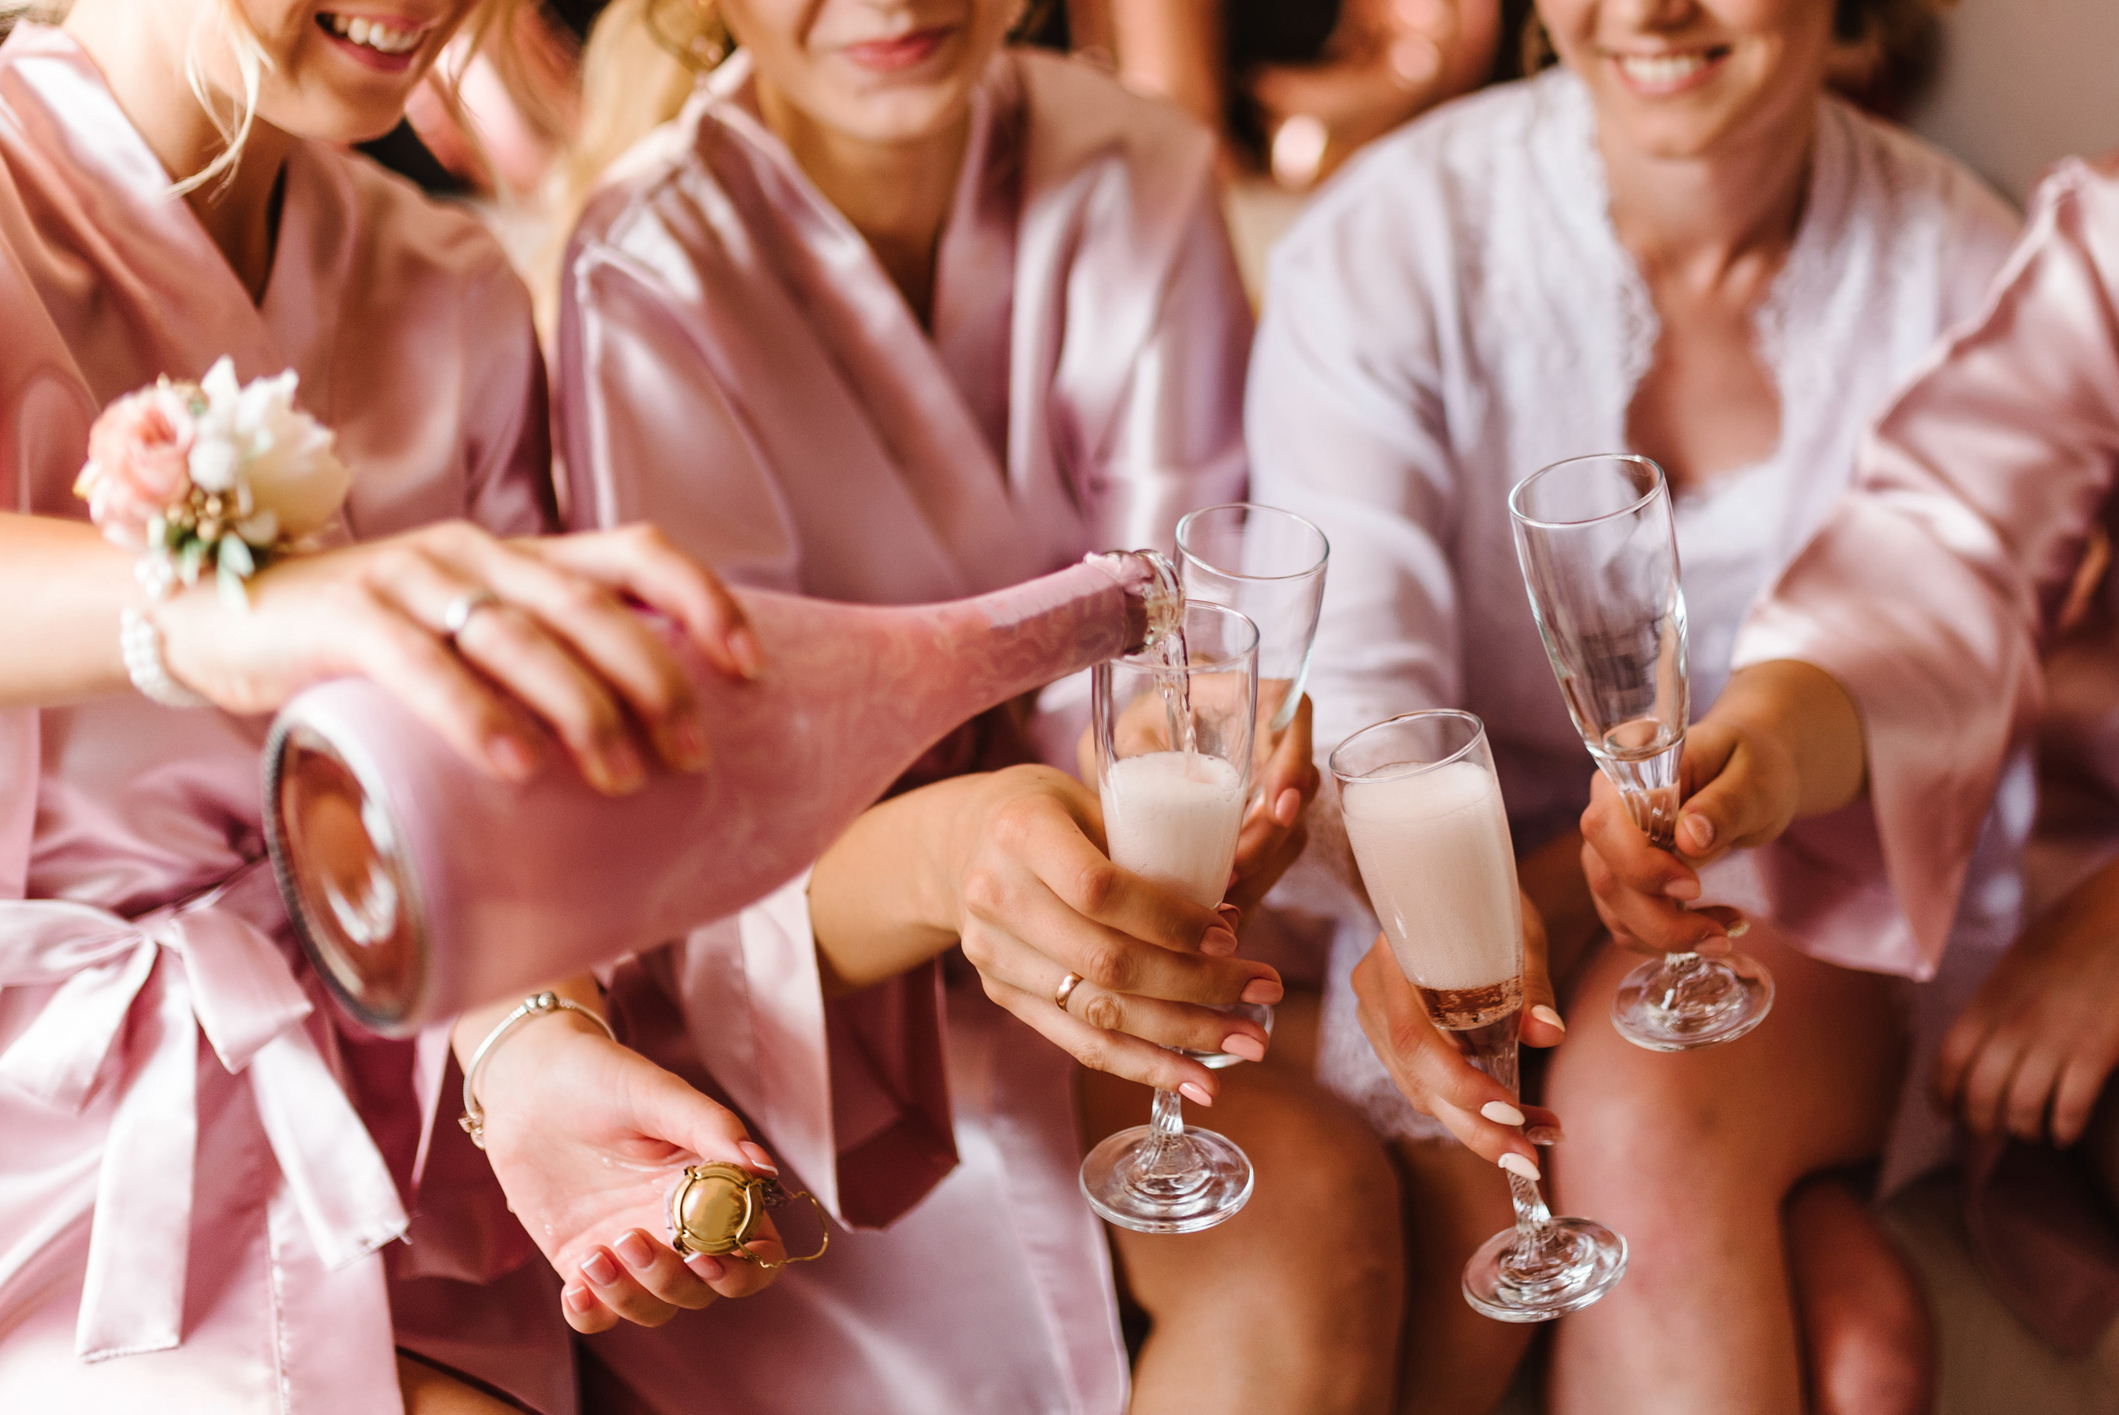 Young bridesmaids clinking with glasses of champagne in hotel room